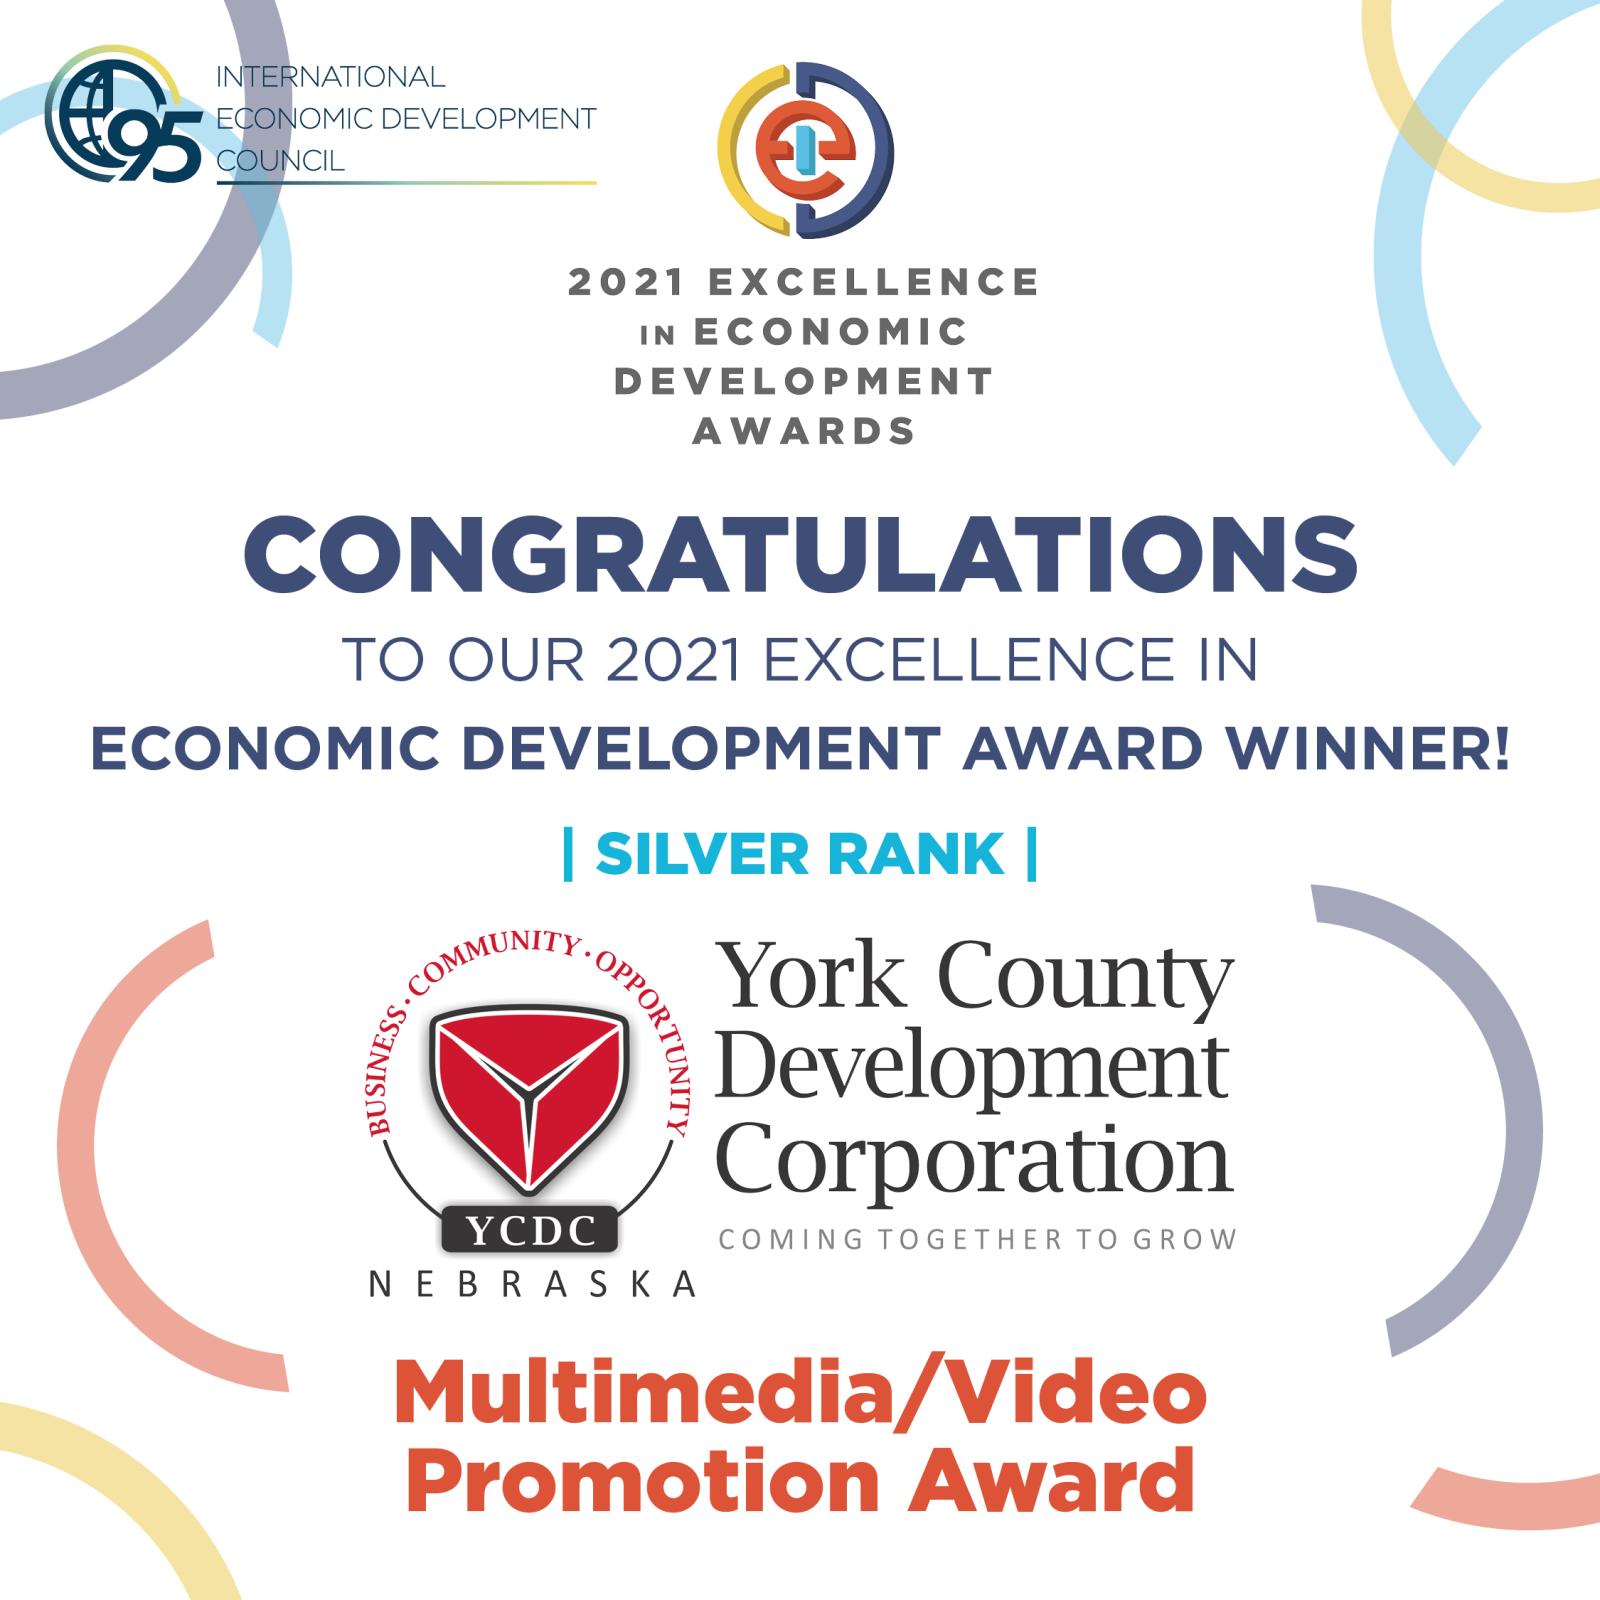 York County Development Corporation Receives Excellence in Economic Development Award from the International Economic Development Council Main Photo